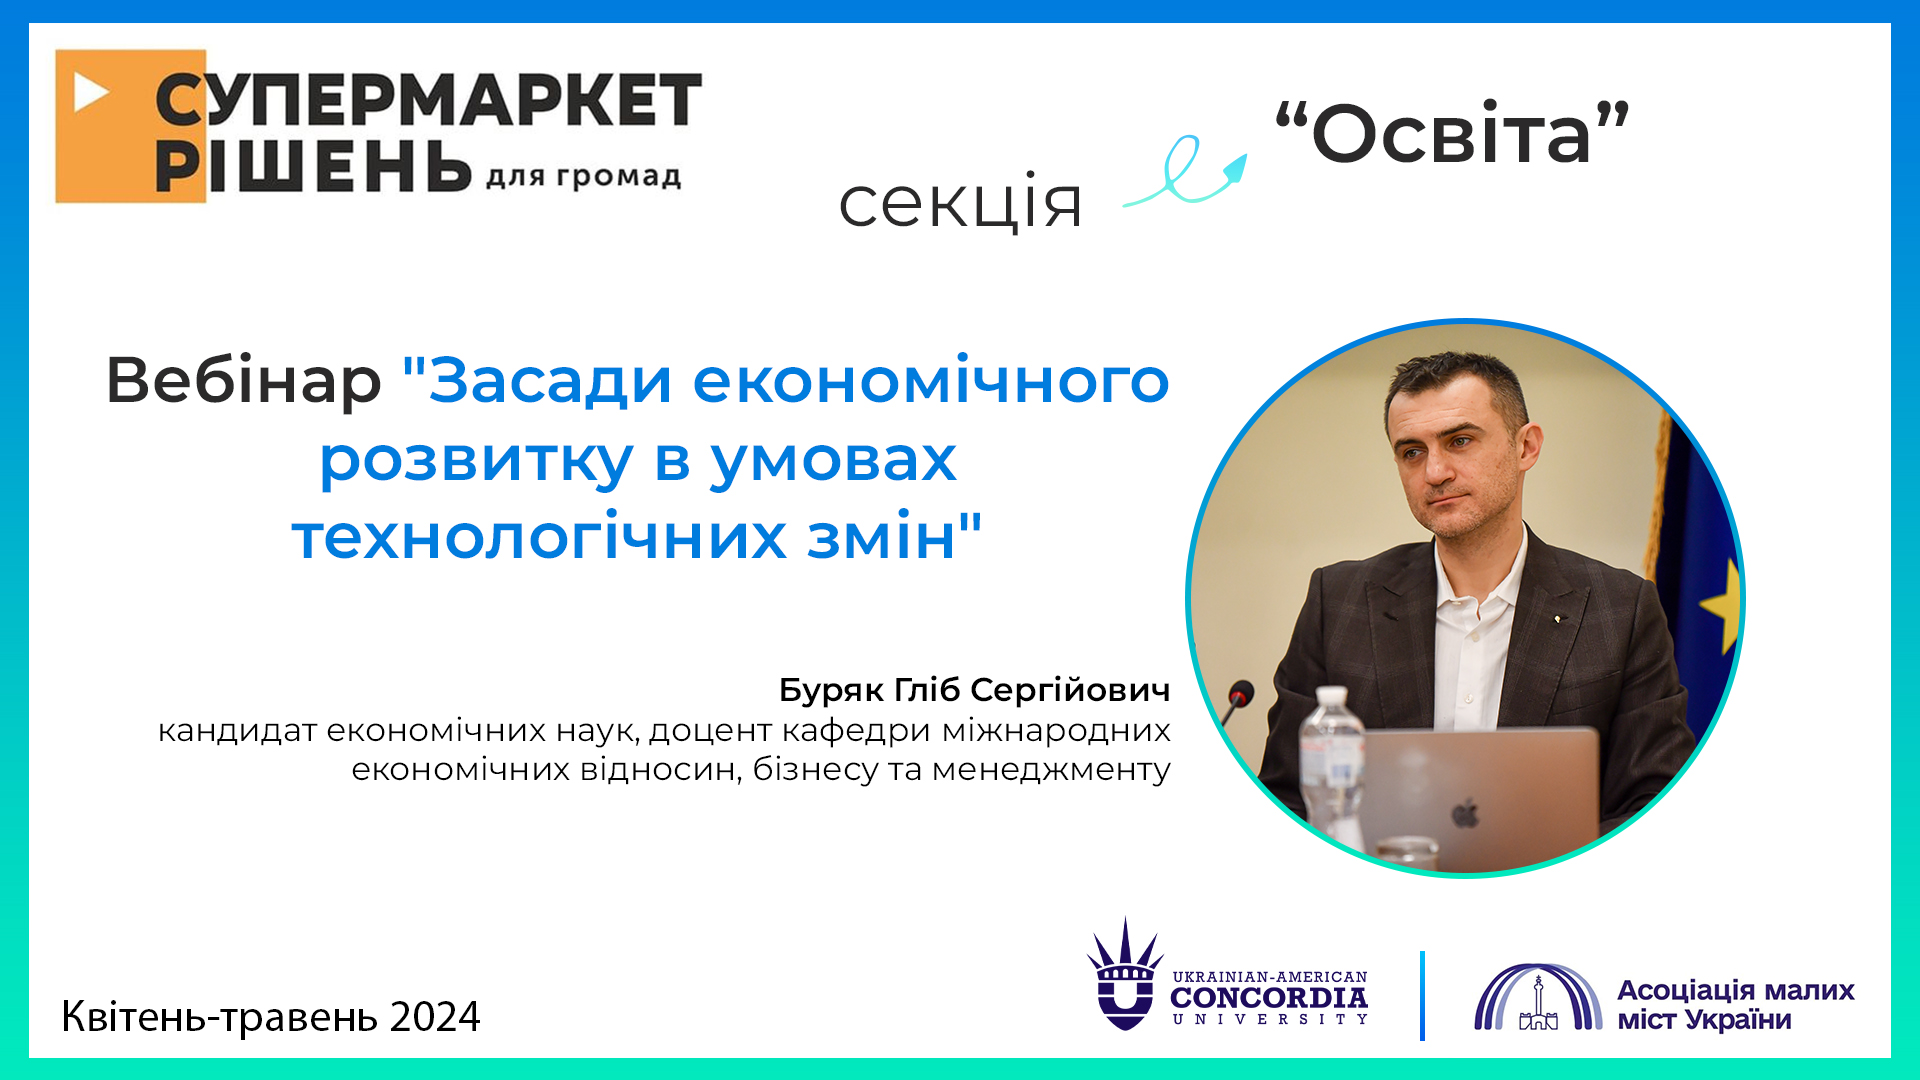 Webinar "Principles of economic development in conditions of technological changes" by Glib Buryak for the Association of Small Cities of Ukraine